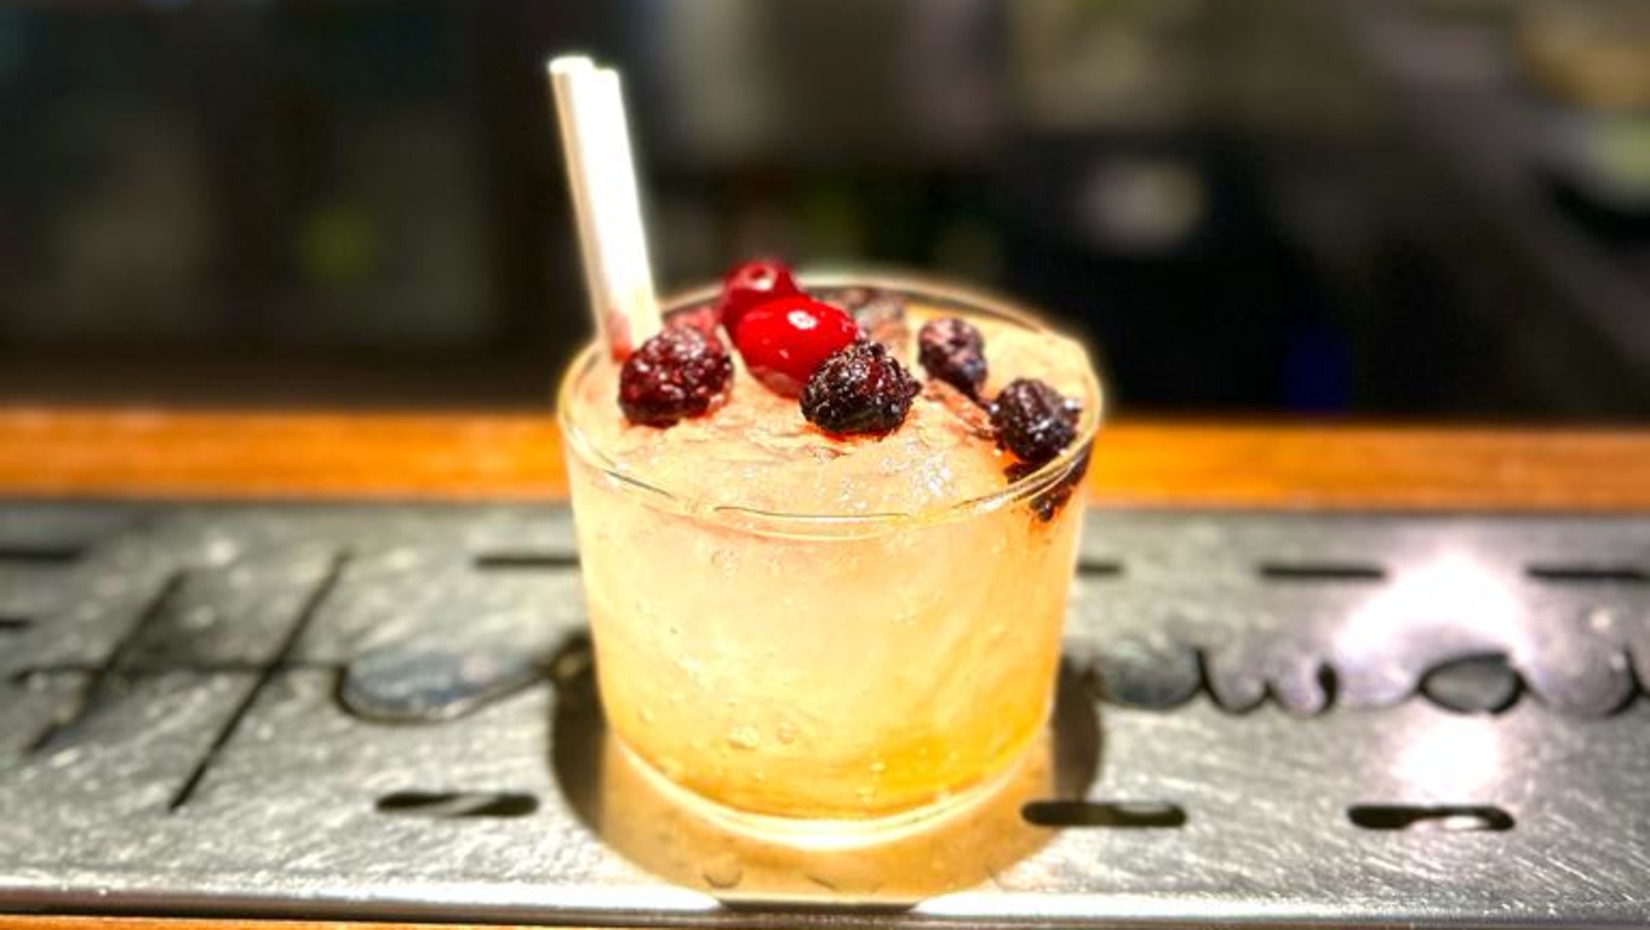 A delicious looking drink with dried fruits on top rest on the counter at Hideaway